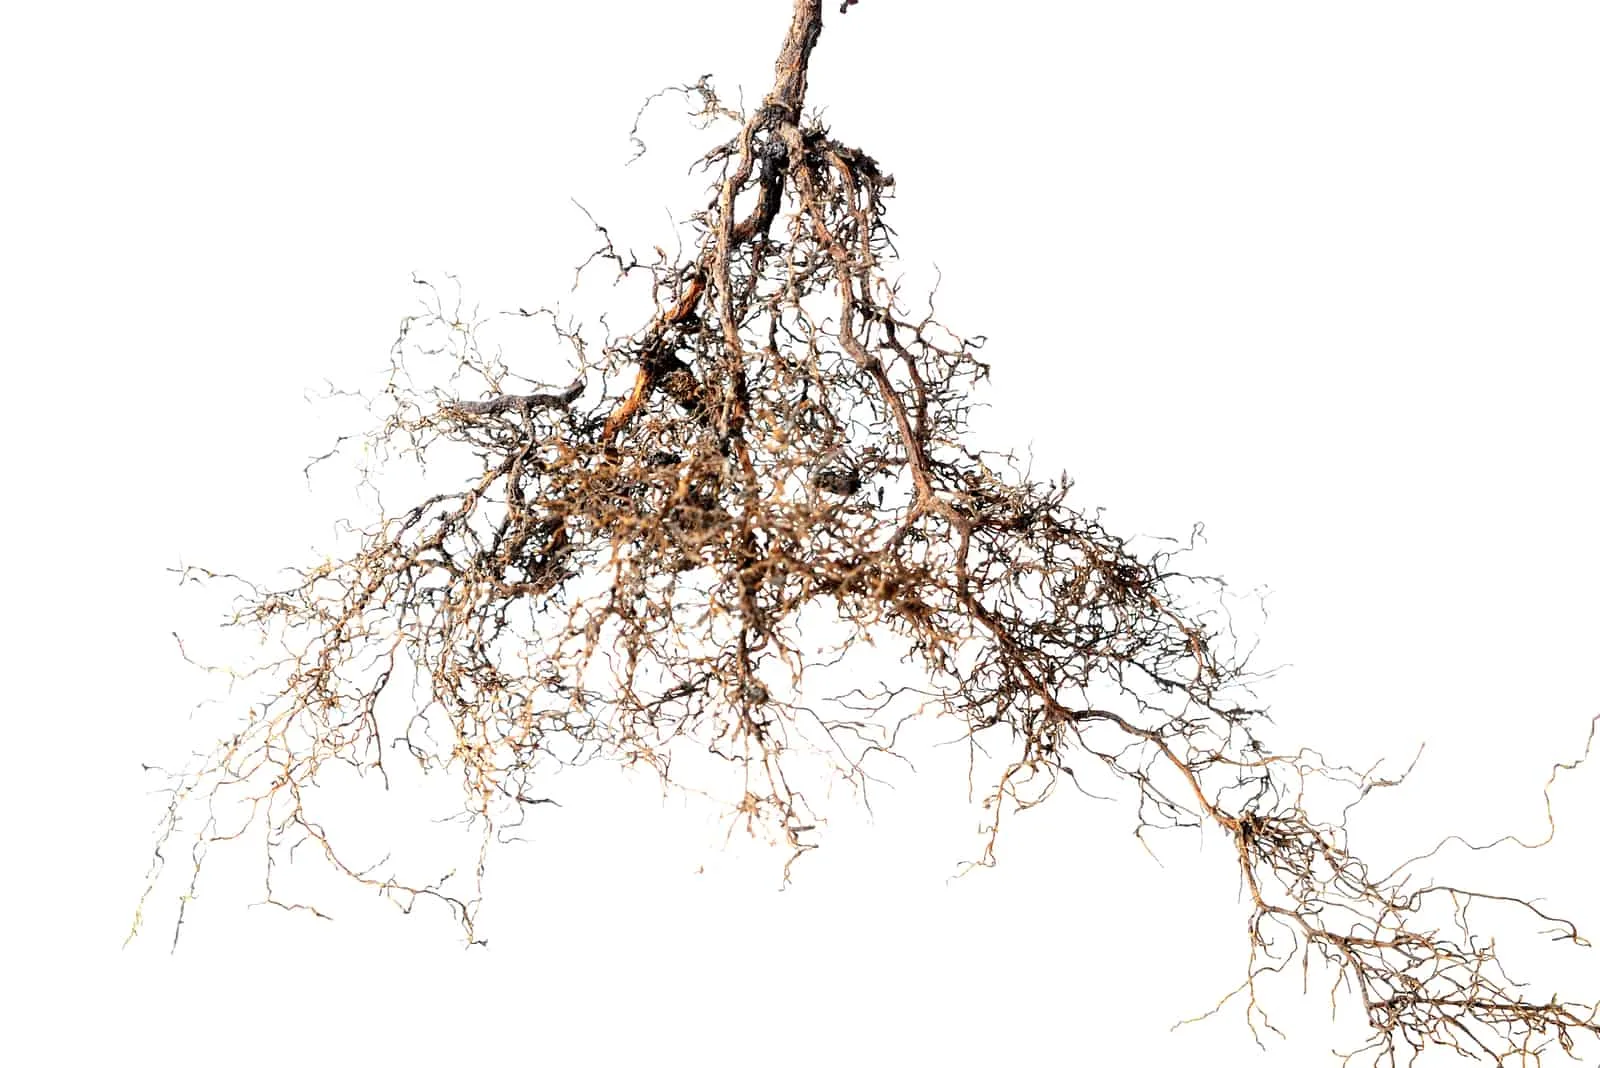 tree roots on white background